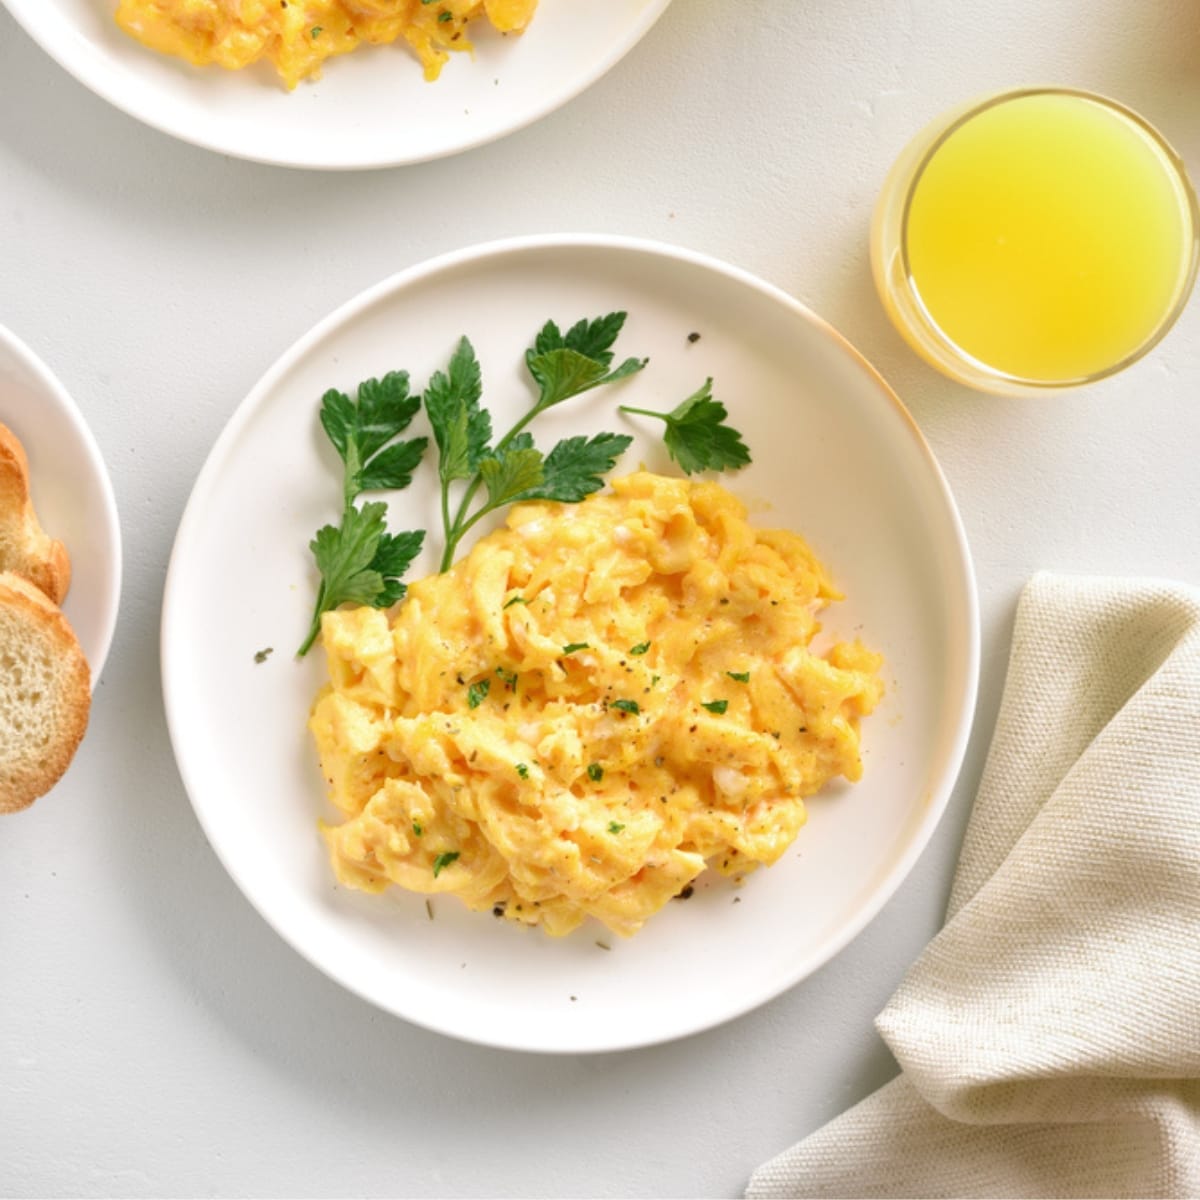 Homemade Scrambled Eggs with Tomatoes and Bread